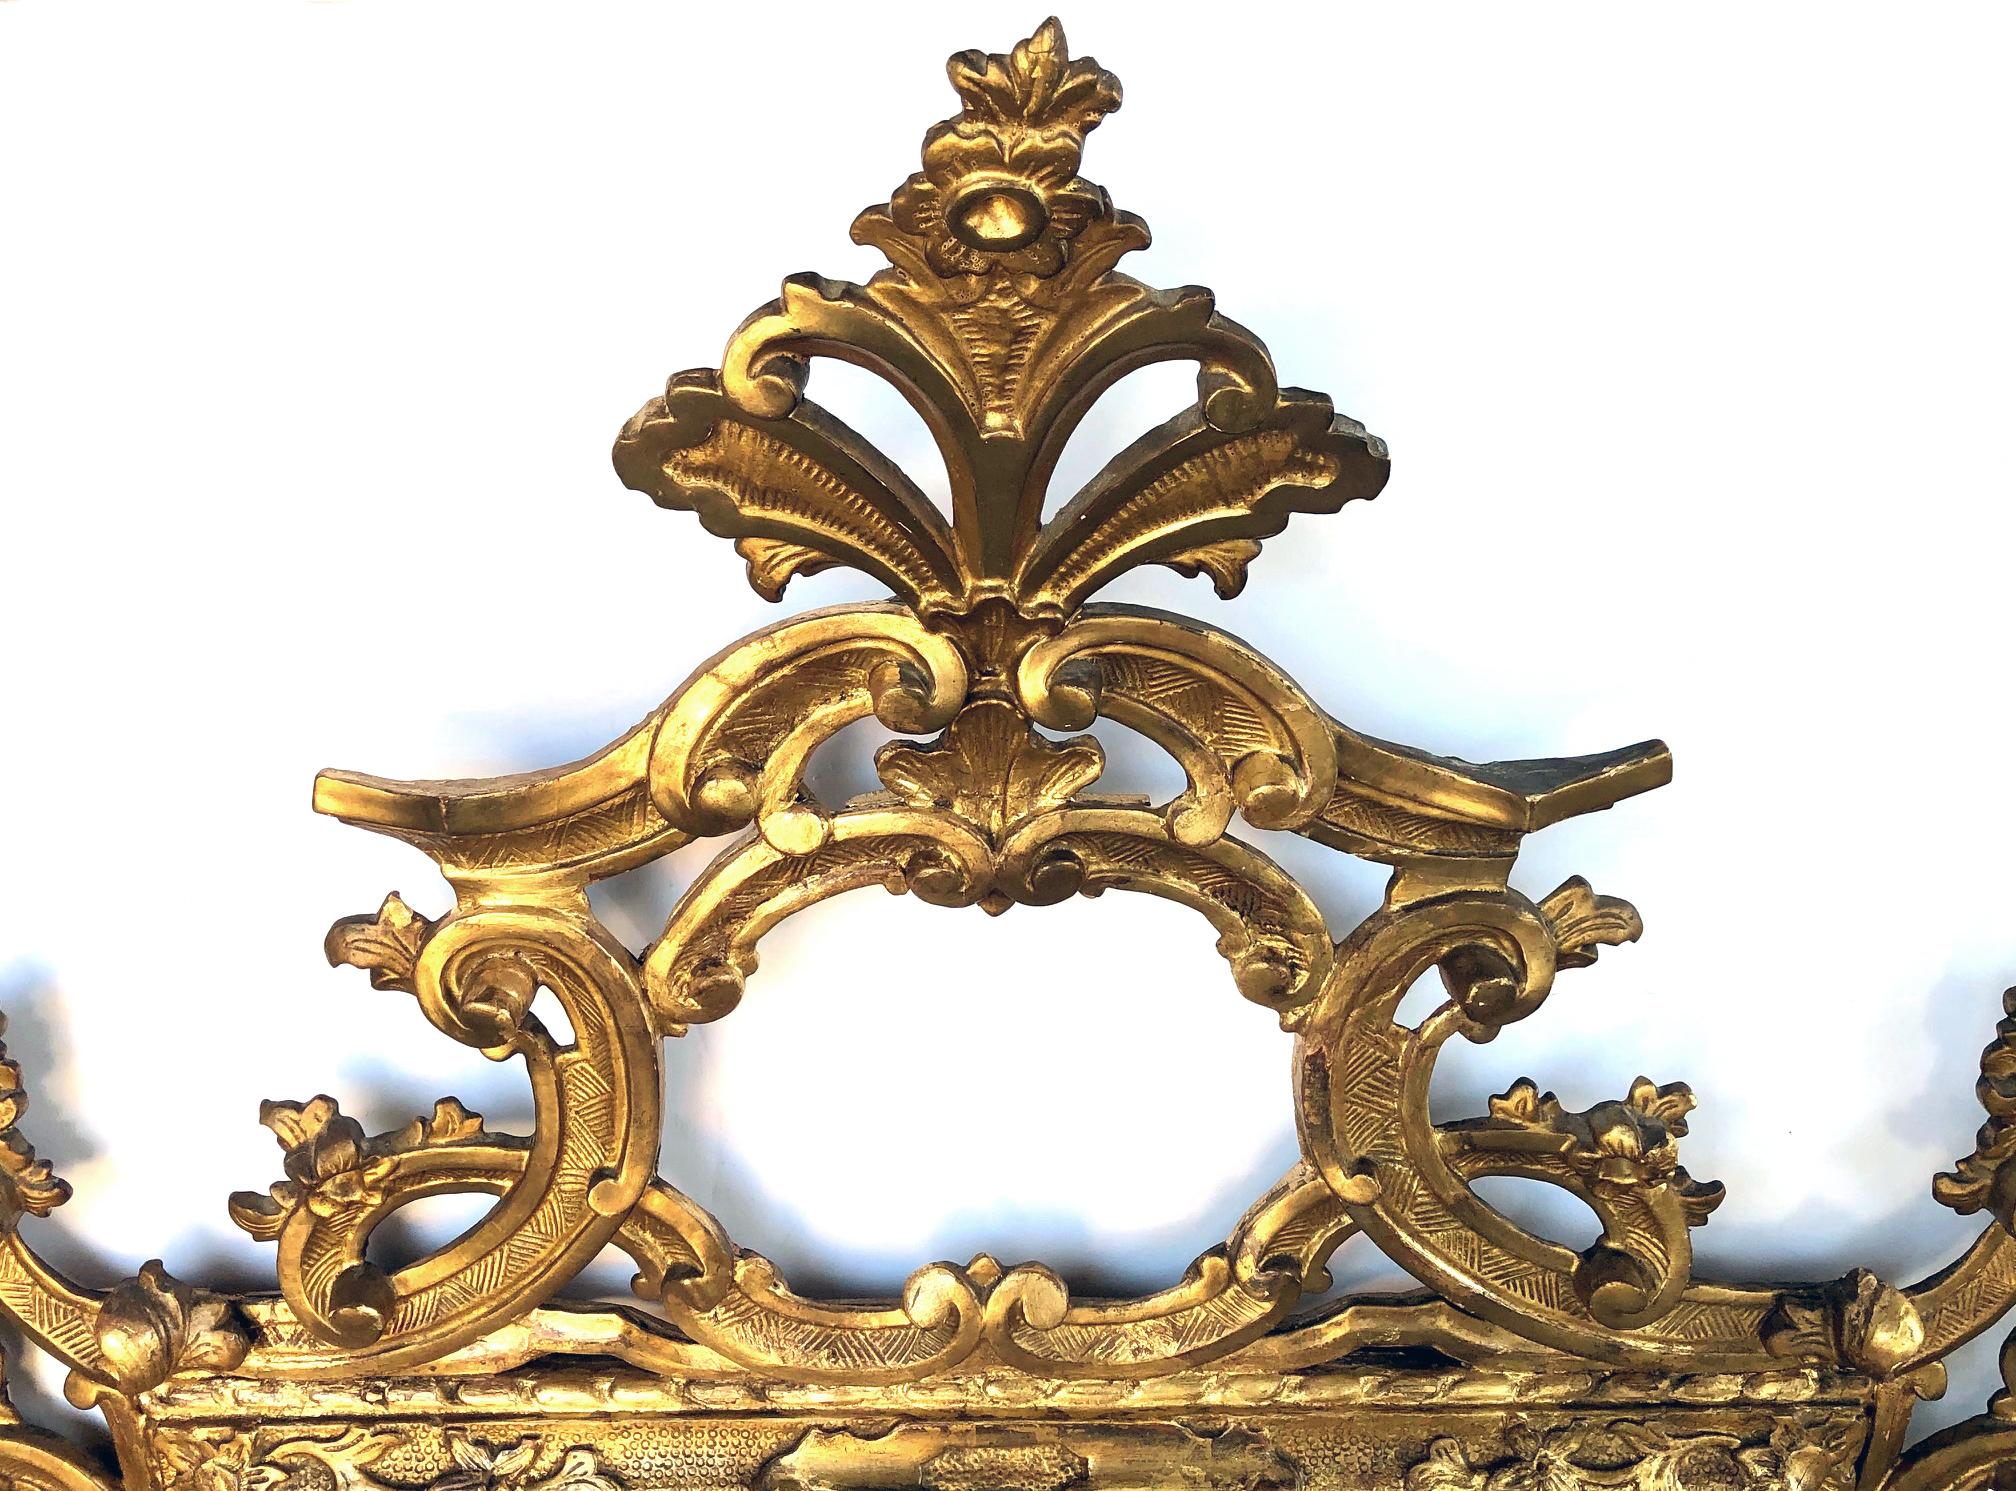 The exuberantly carved openwork crest composed of dramatic interlacing C-scroll motifs with floral and foliate elements cascading down the sides; all surrounding the original beveled mirror plate within a relief-carved molding